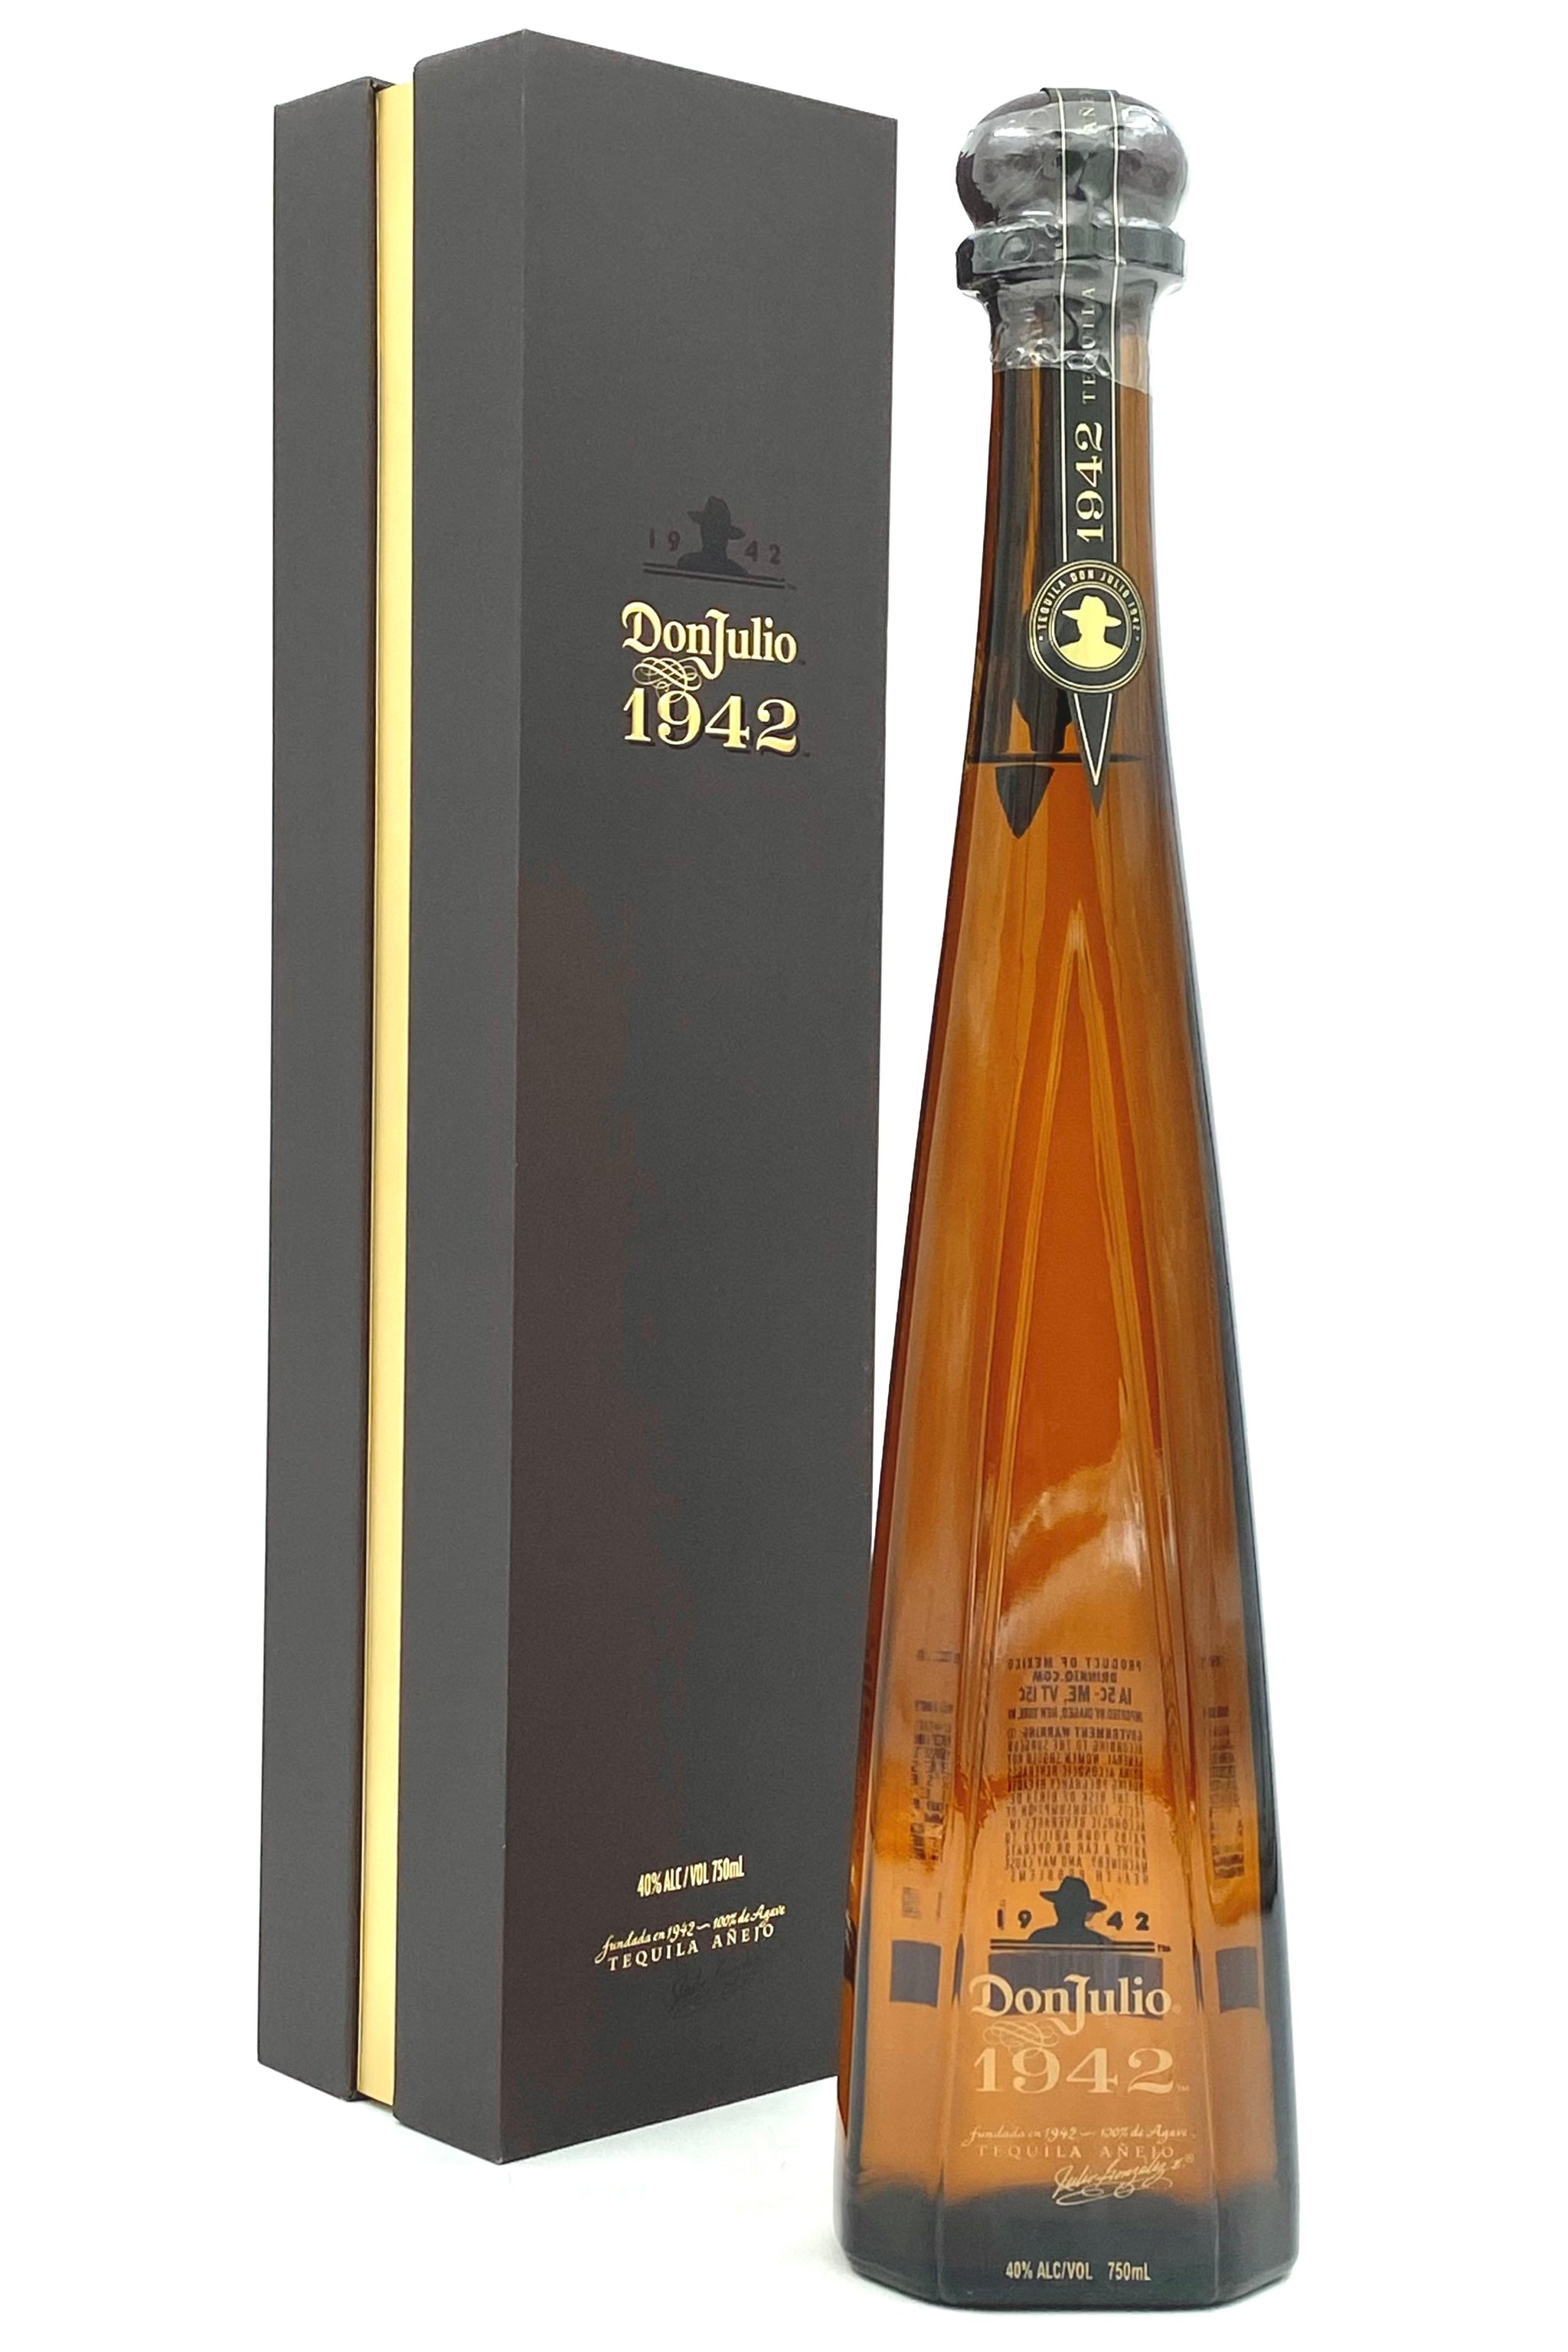 Buy Don Julio 1942 Anejo Tequila Online